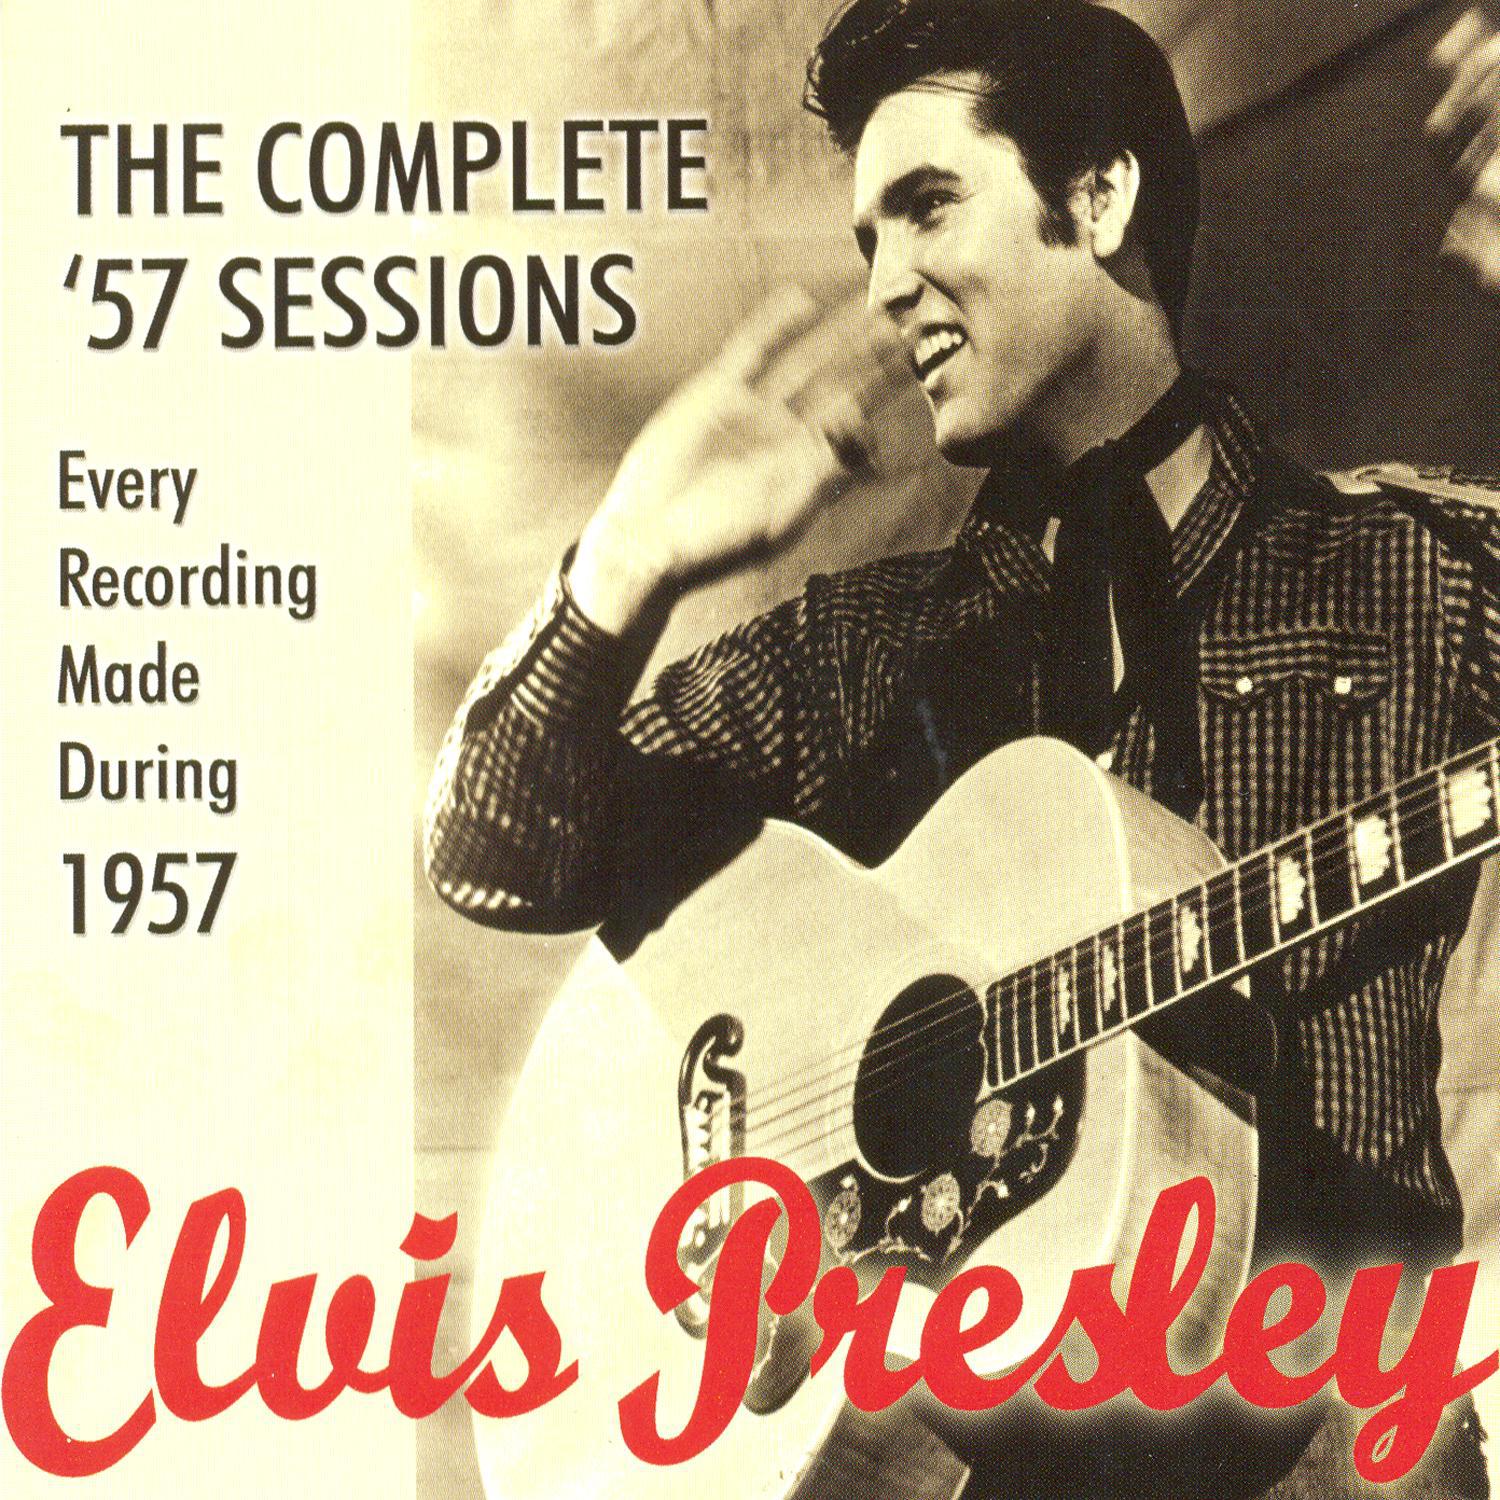 The Complete '57 Sessions: Elvis Presley Every Recording Made During 1957